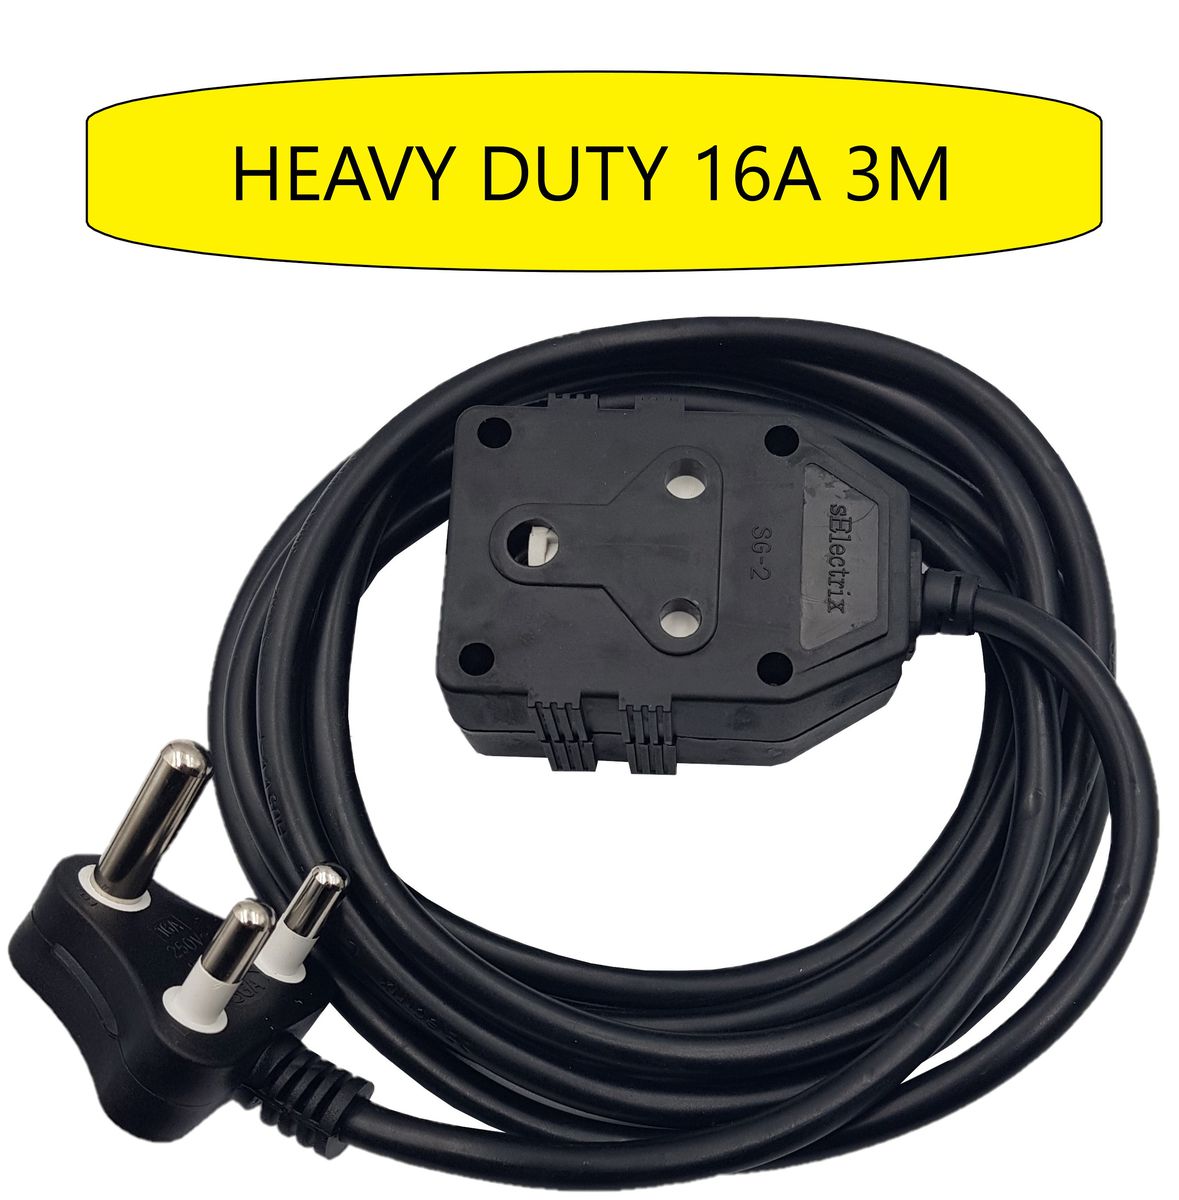 3M Heavy Duty 16A Extension Electrical Lead / Cord / Cable Black